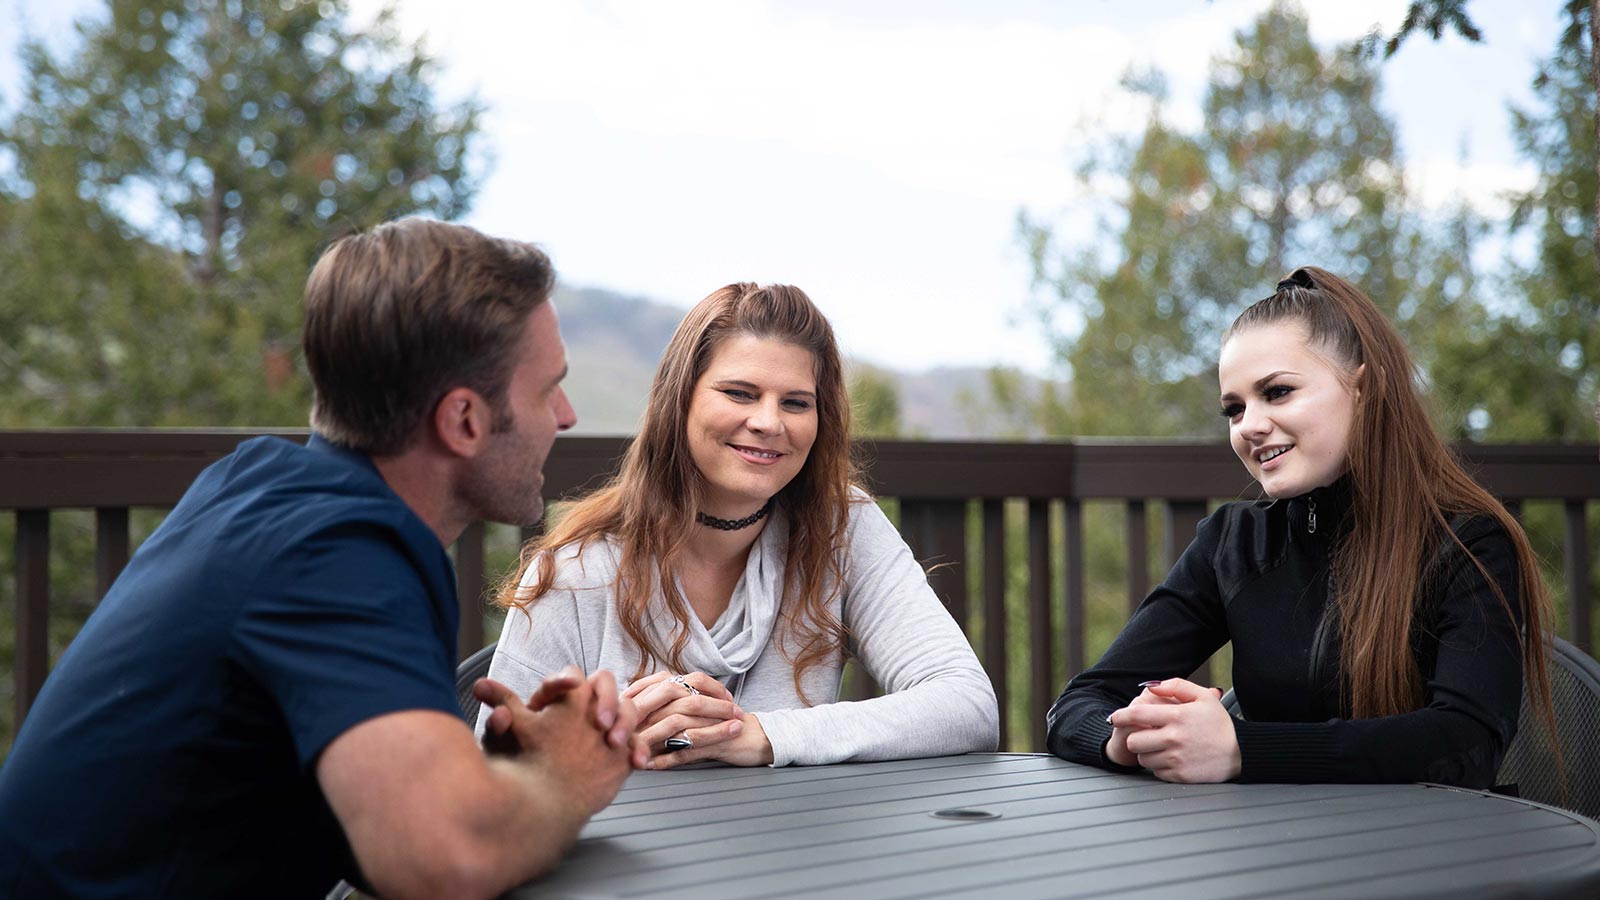 Three people engaged in a friendly discussion at an outdoor table, surrounded by a tranquil natural landscape.